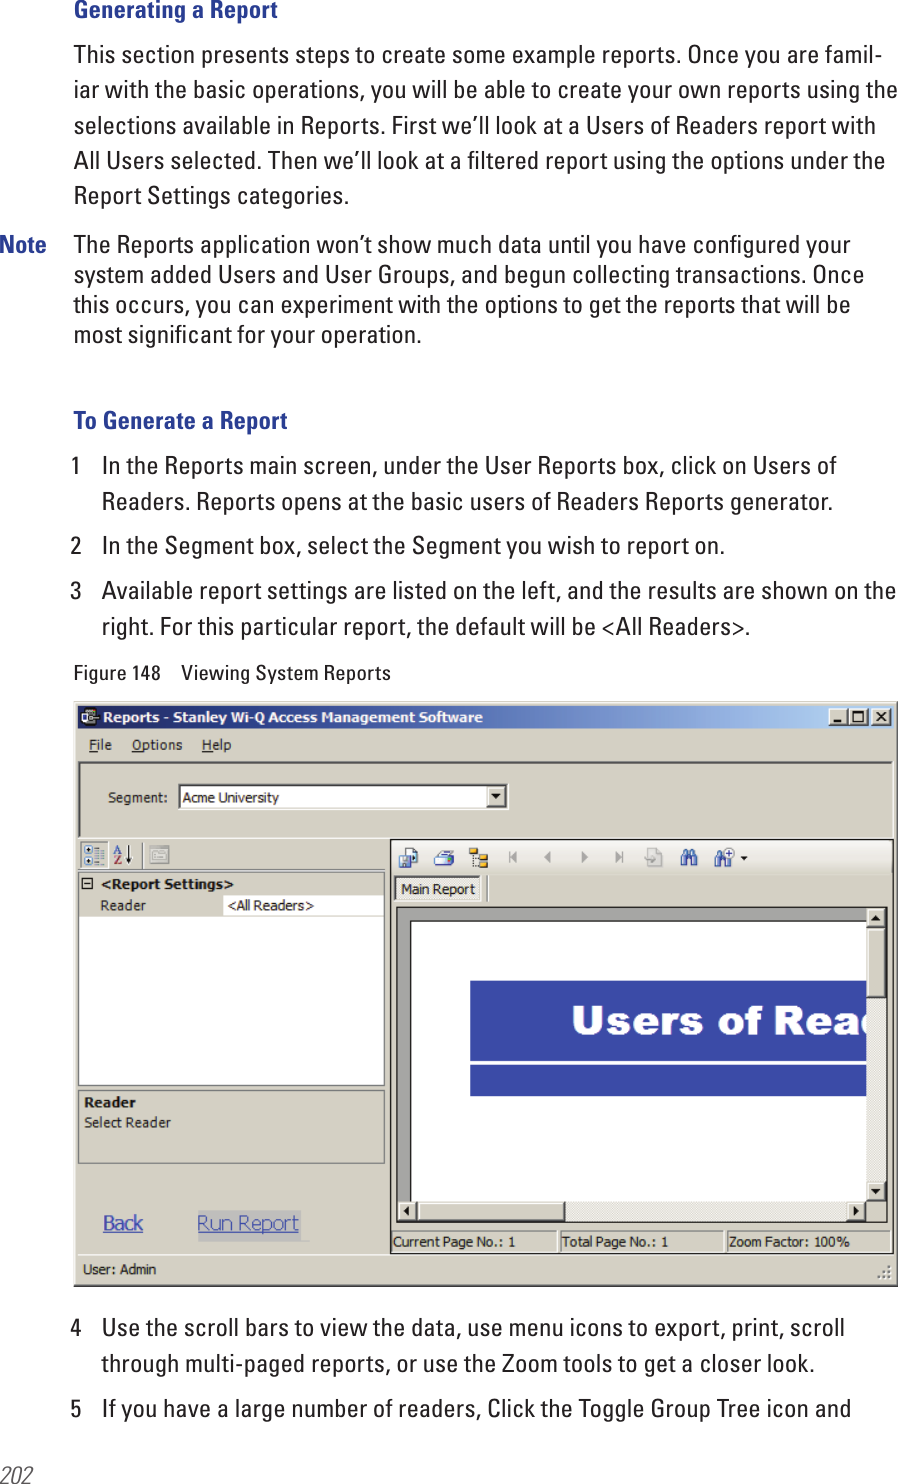 202Generating a ReportThis section presents steps to create some example reports. Once you are famil-iar with the basic operations, you will be able to create your own reports using the selections available in Reports. First we’ll look at a Users of Readers report with All Users selected. Then we’ll look at a ﬁltered report using the options under the Report Settings categories.Note  The Reports application won’t show much data until you have conﬁgured your system added Users and User Groups, and begun collecting transactions. Once this occurs, you can experiment with the options to get the reports that will be most signiﬁcant for your operation.To Generate a Report1  In the Reports main screen, under the User Reports box, click on Users of Readers. Reports opens at the basic users of Readers Reports generator. 2  In the Segment box, select the Segment you wish to report on.3  Available report settings are listed on the left, and the results are shown on the right. For this particular report, the default will be &lt;All Readers&gt;.Figure 148  Viewing System Reports4  Use the scroll bars to view the data, use menu icons to export, print, scroll through multi-paged reports, or use the Zoom tools to get a closer look. 5  If you have a large number of readers, Click the Toggle Group Tree icon and 